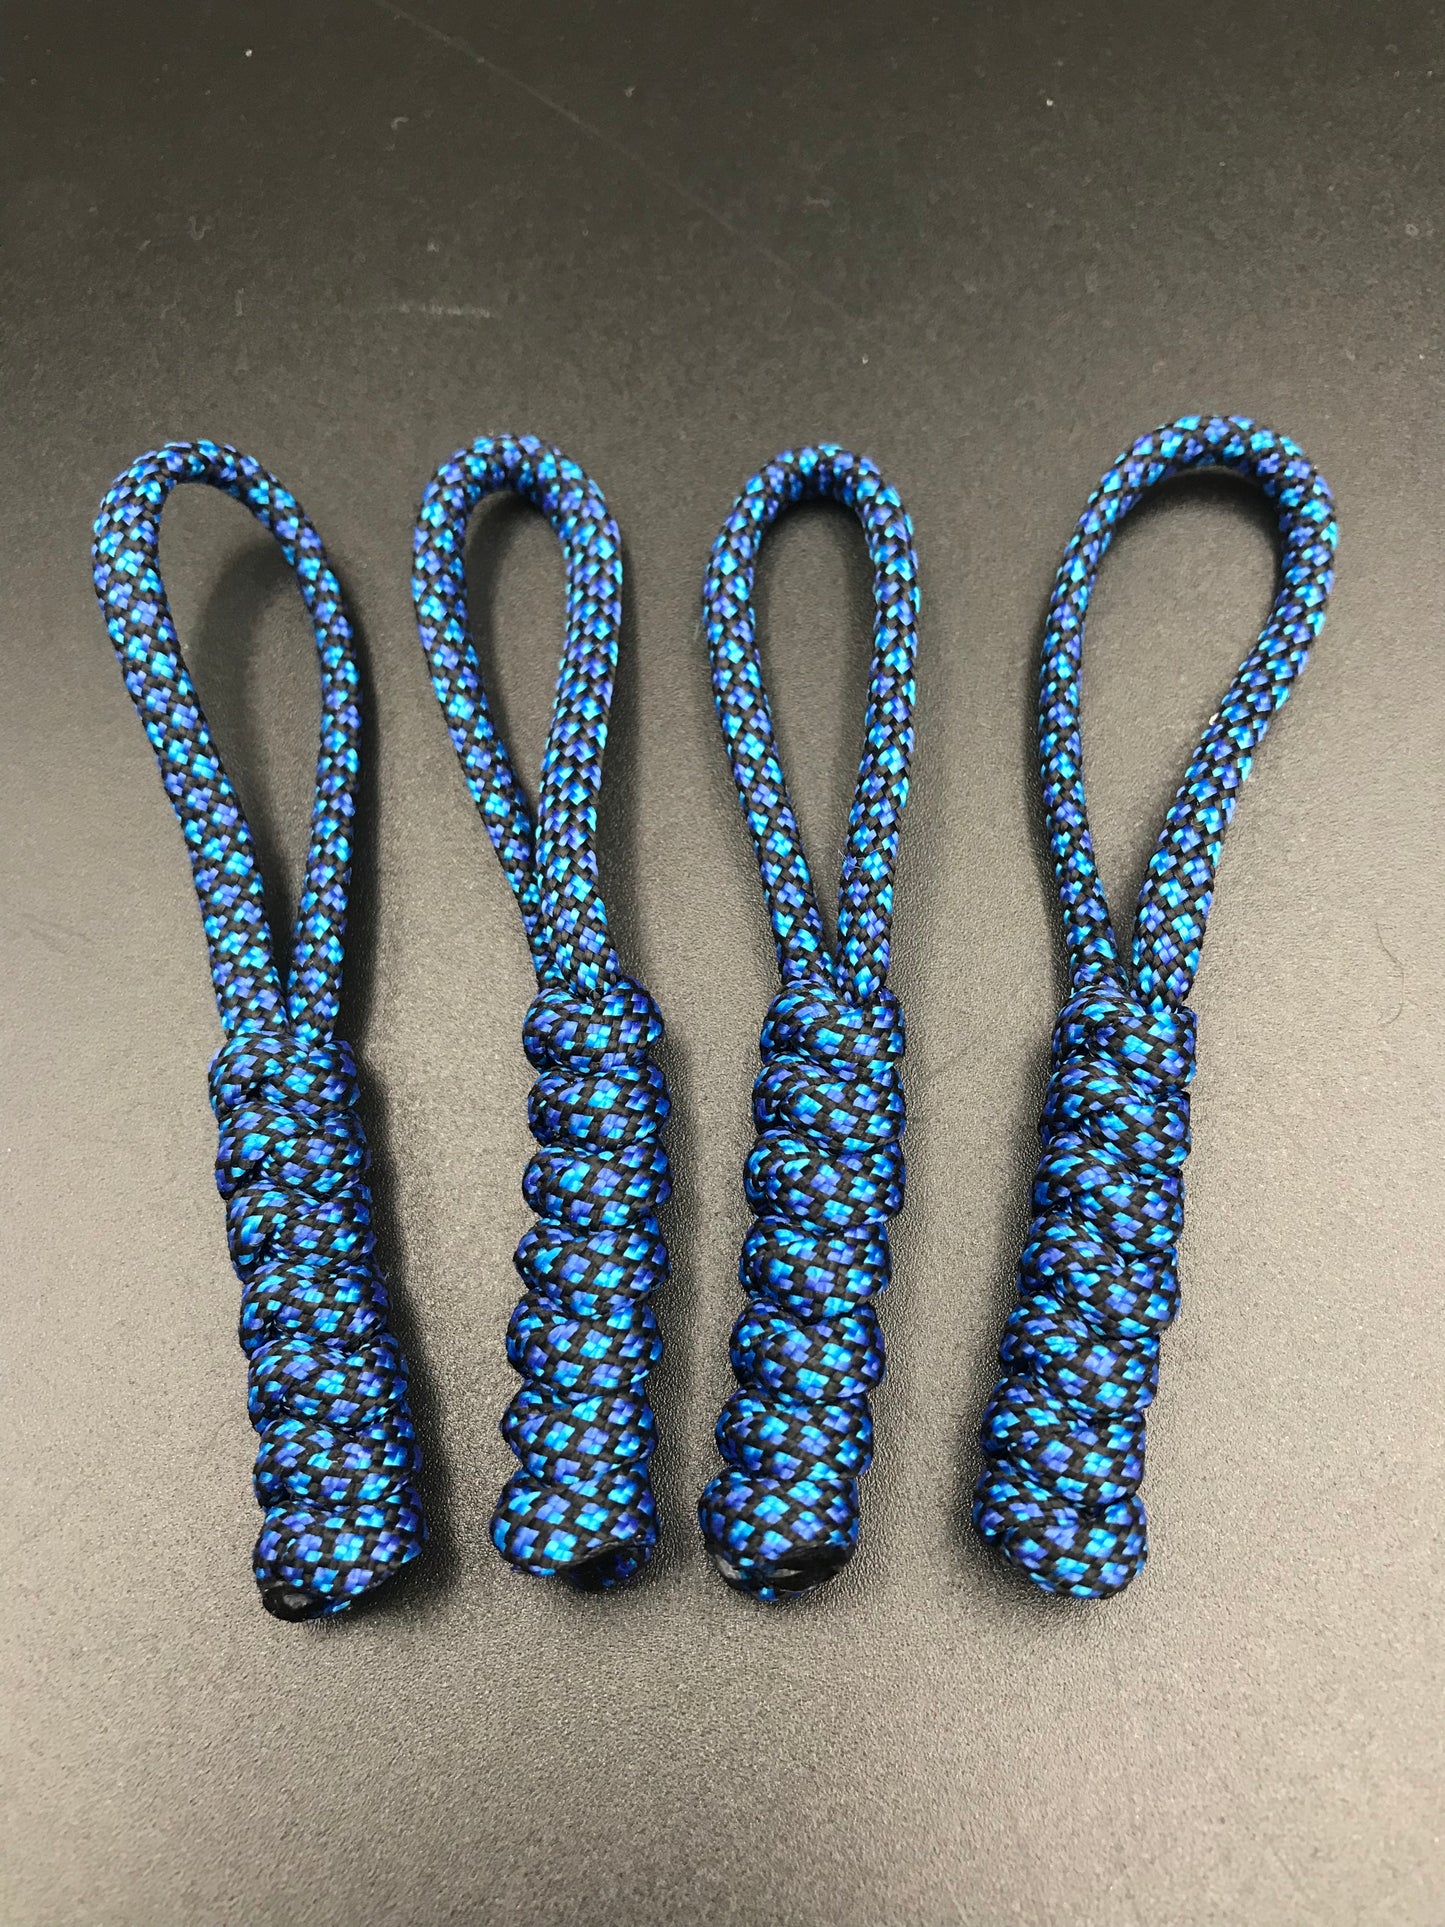 Paracord zip pulls in blue diamond 4 pack) light weight and strong, handmade in U.K